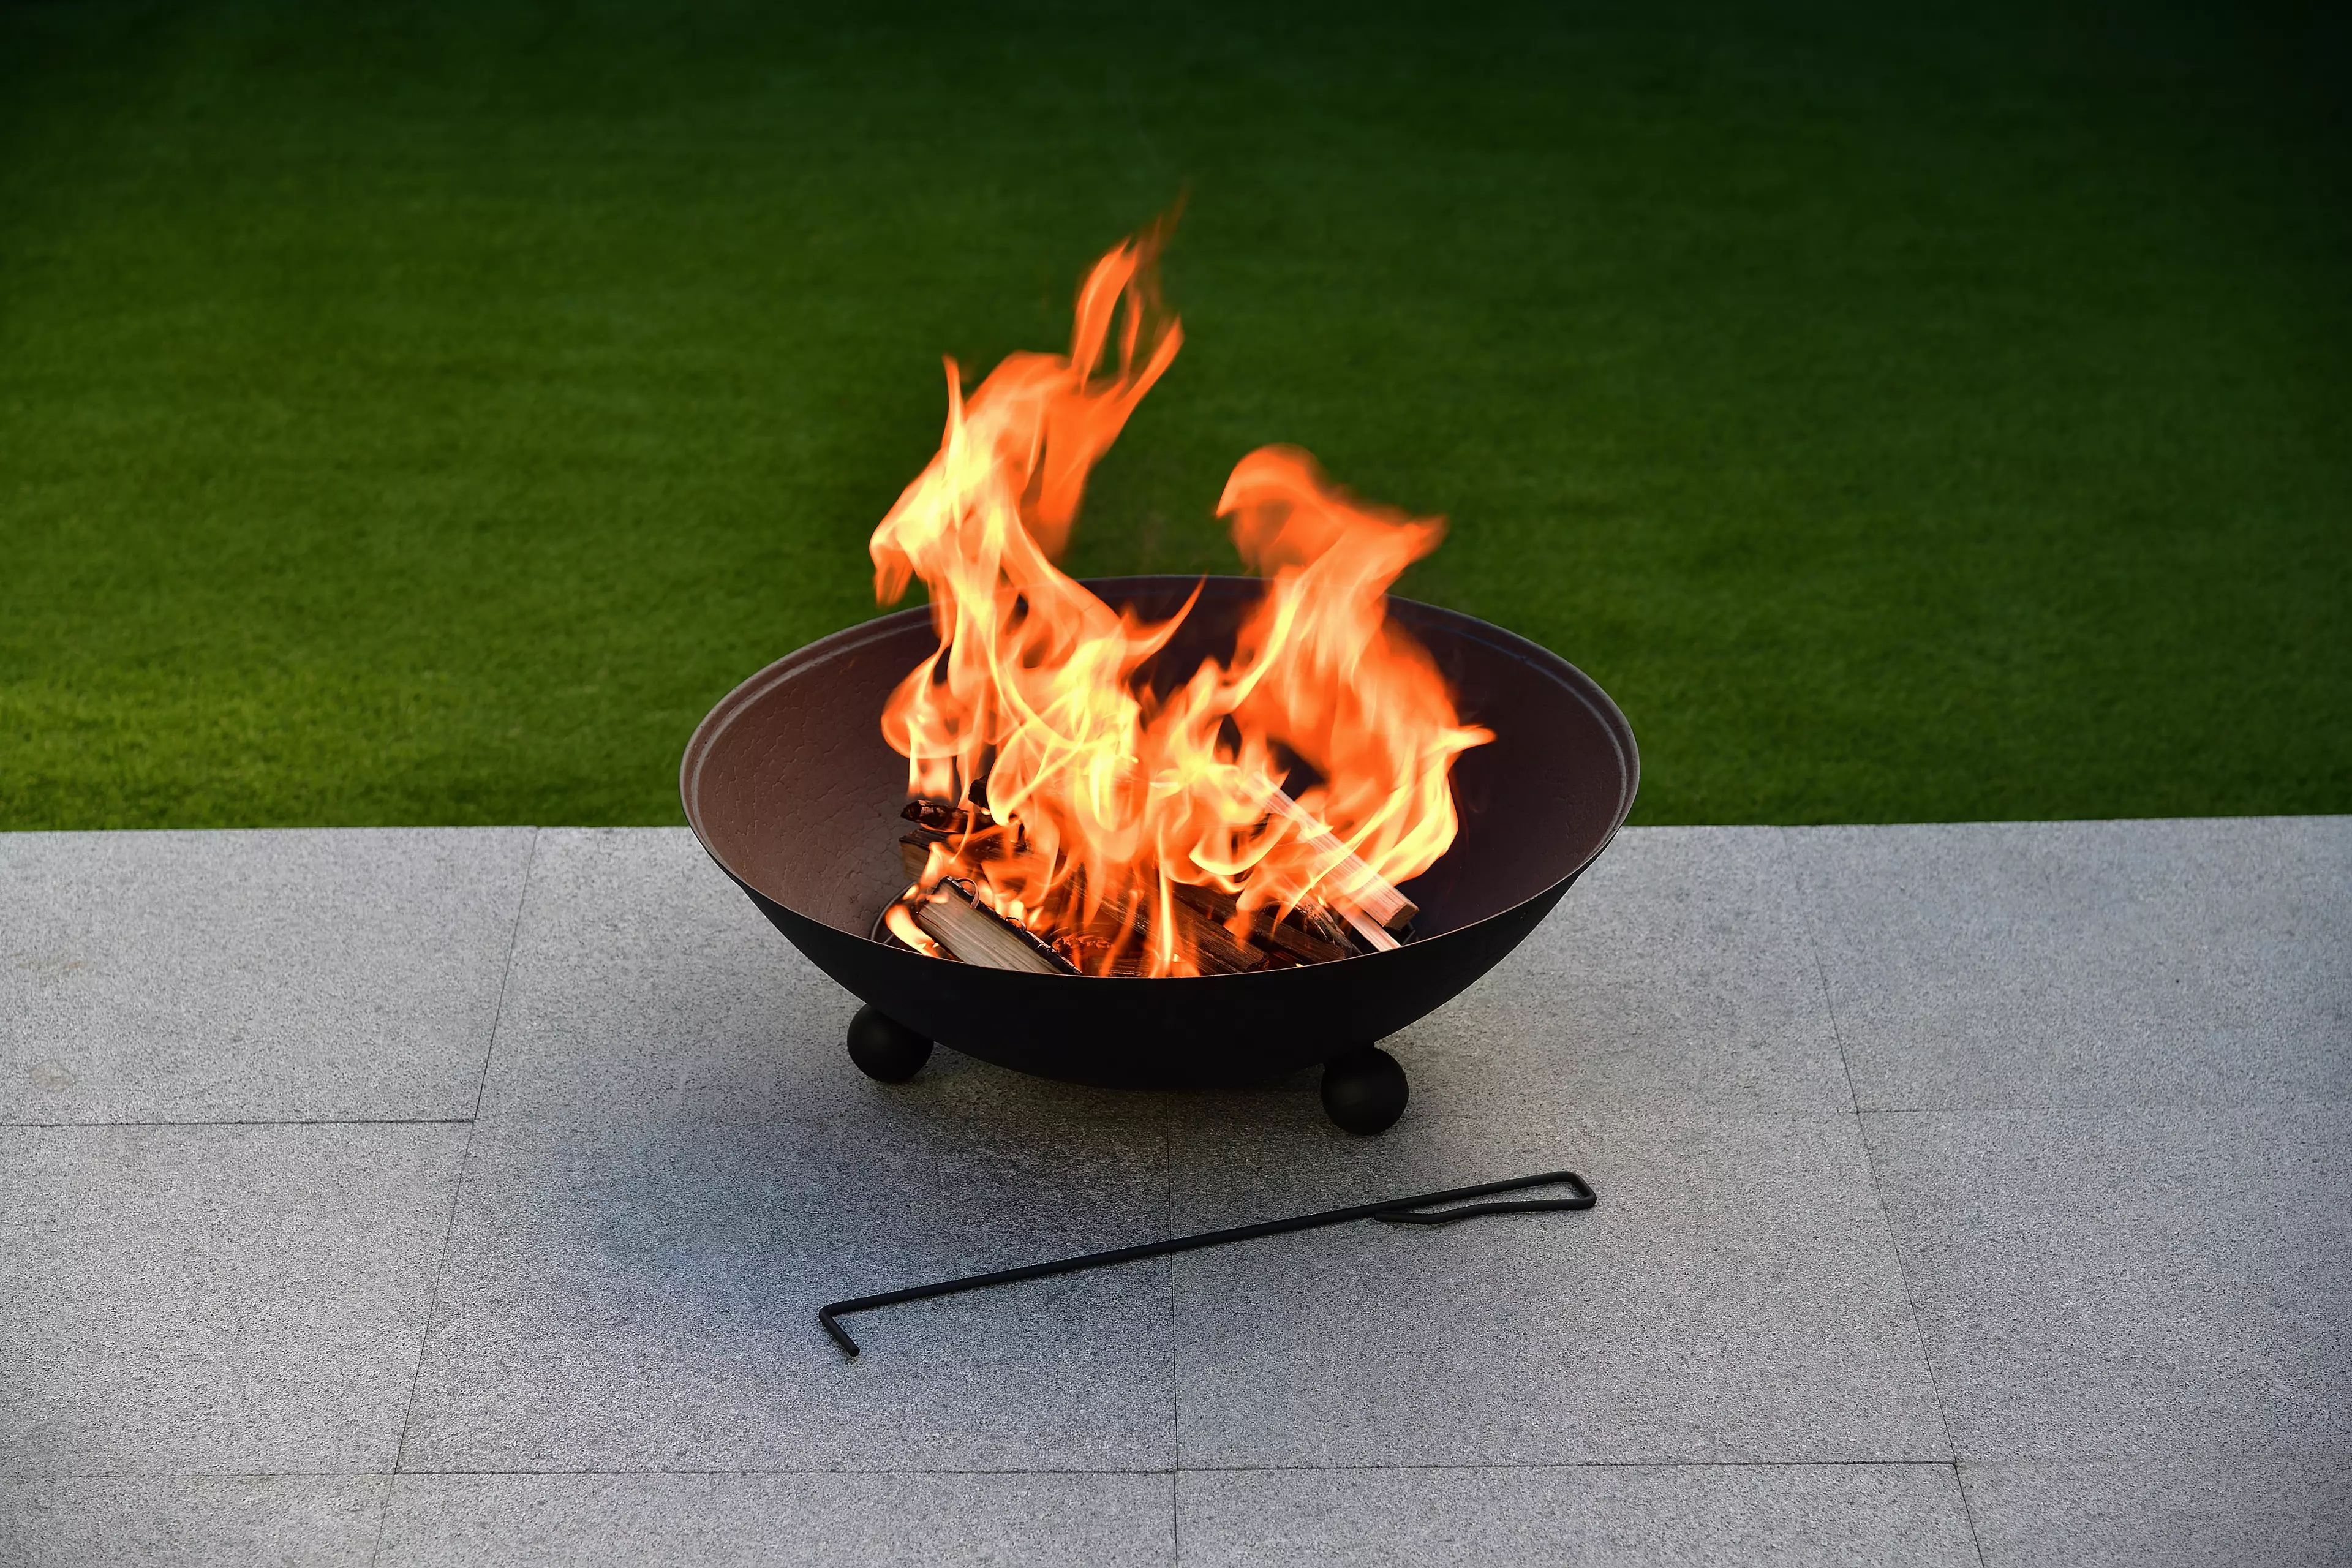 The Chicago Bowl fire pit (